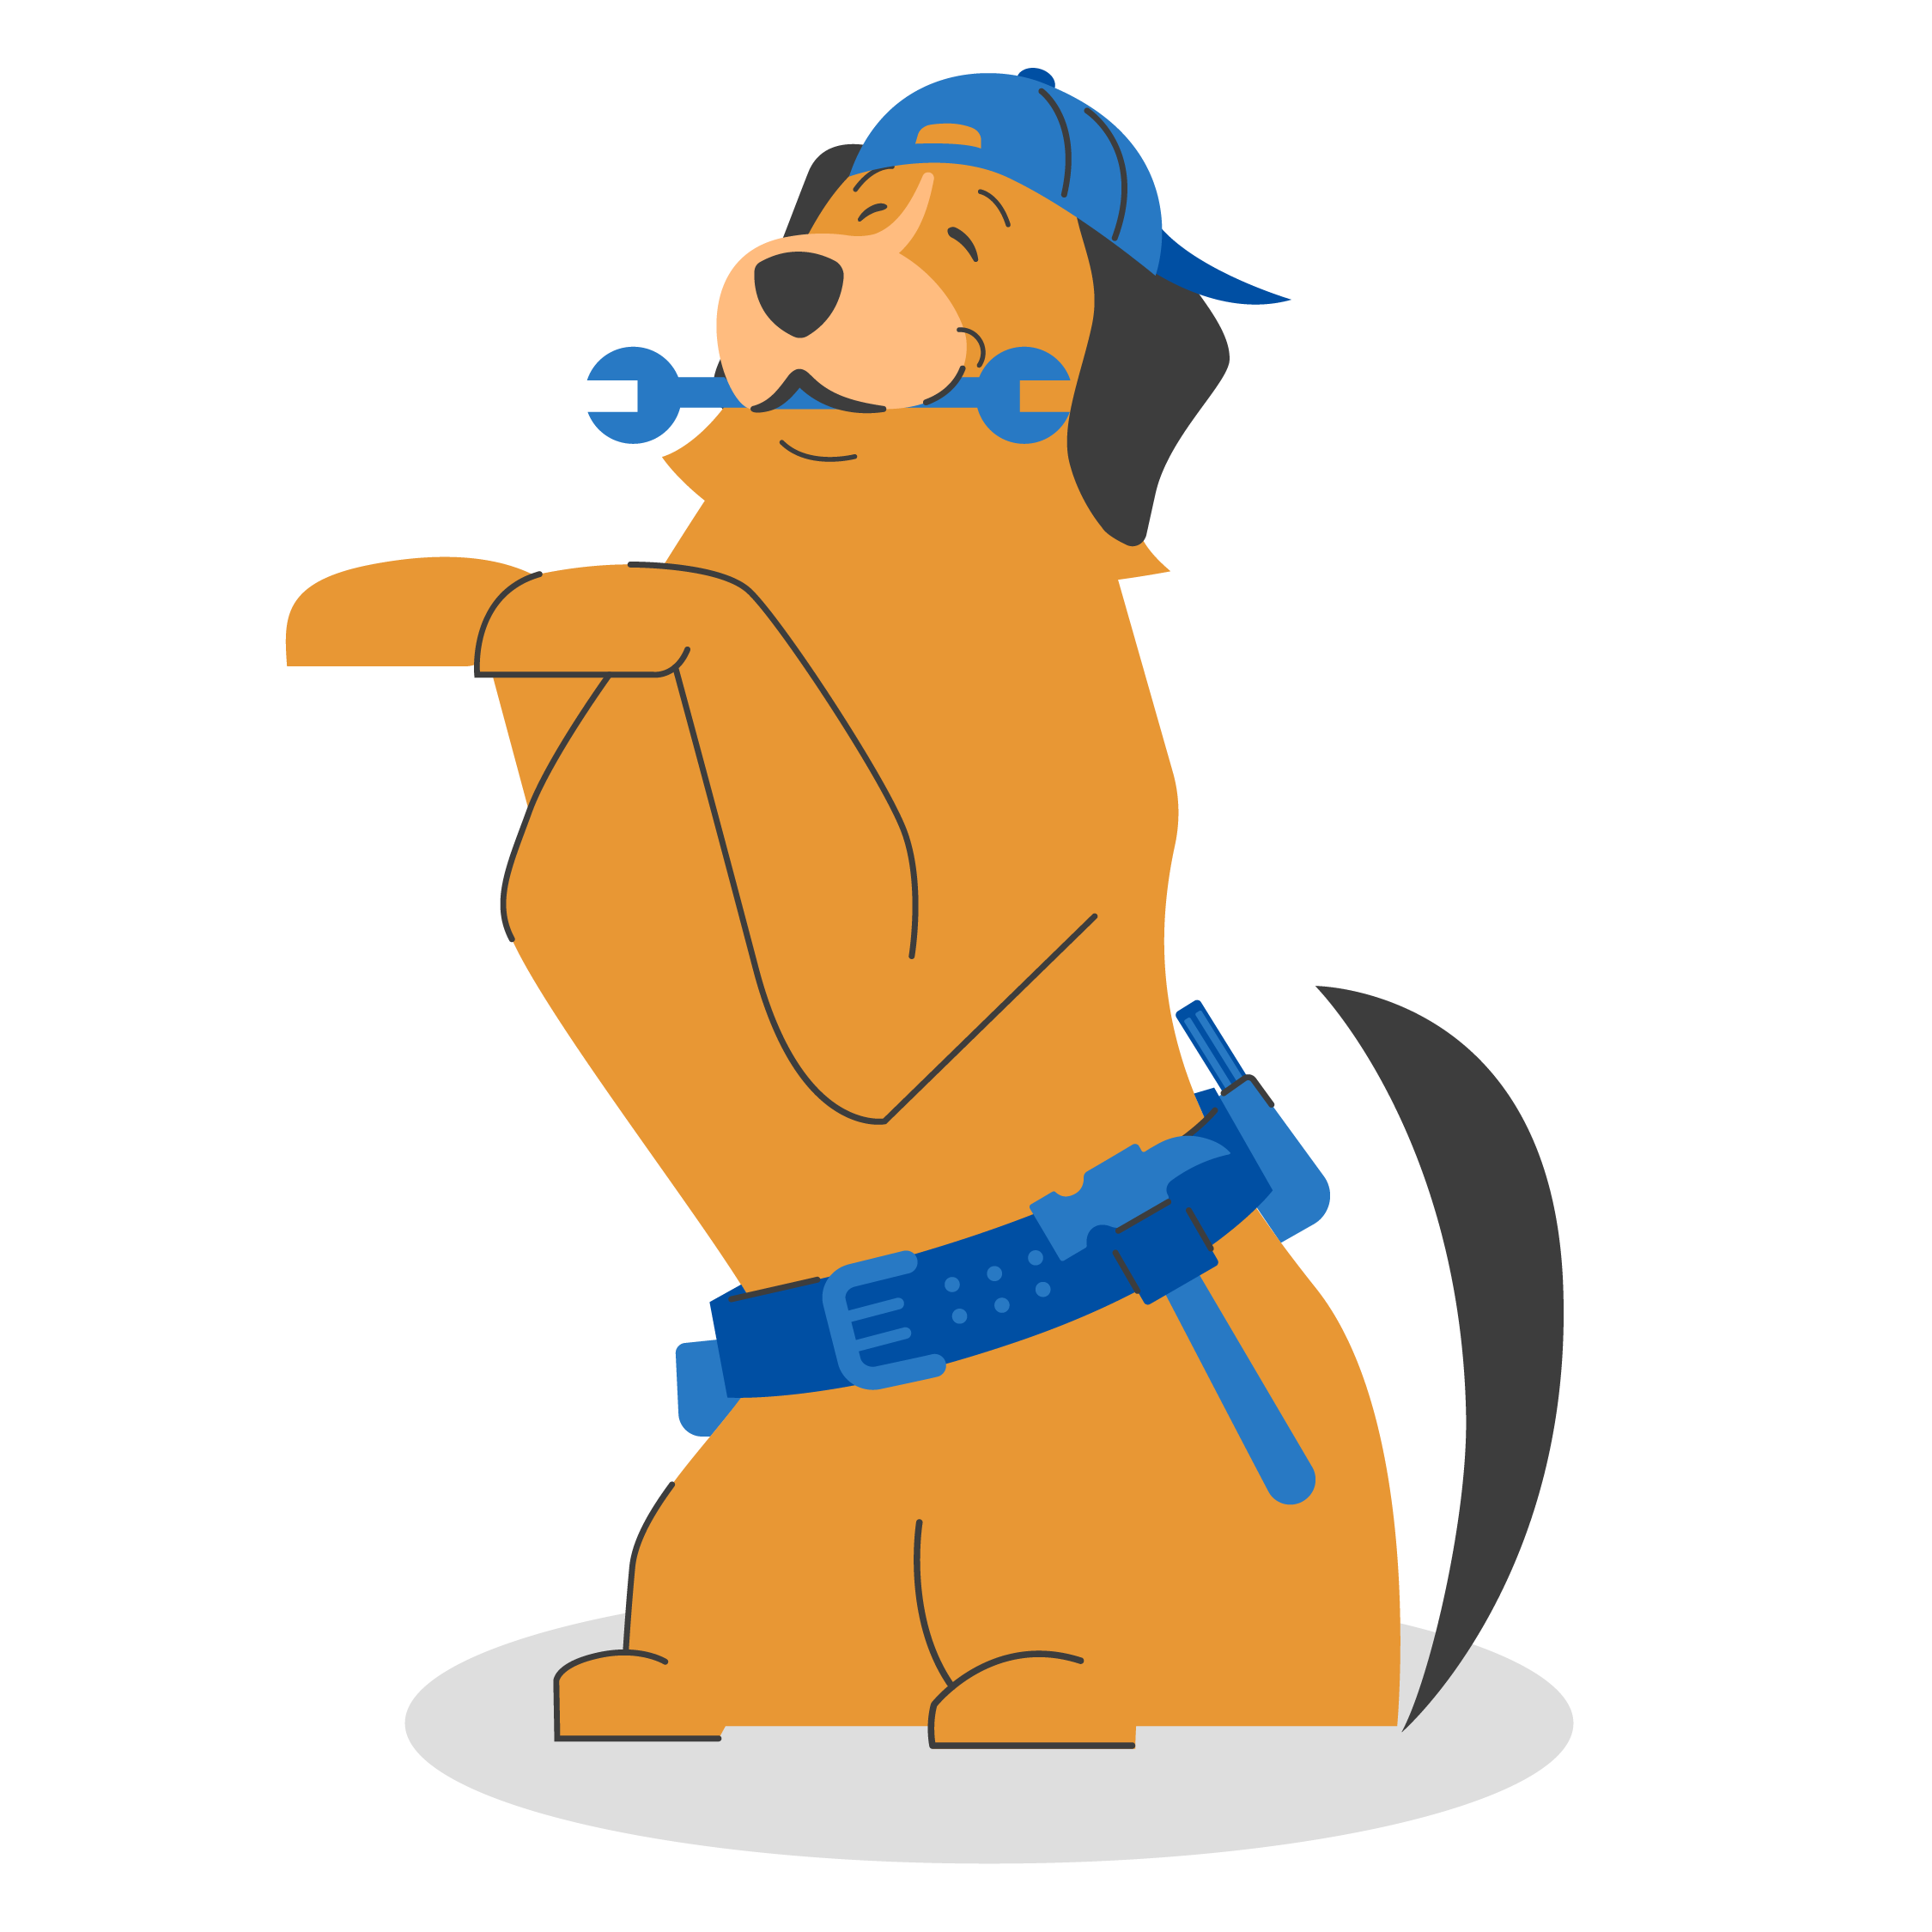 animated brown dog sitting up with blue wrench in its mouth and a blue tool belt around waist